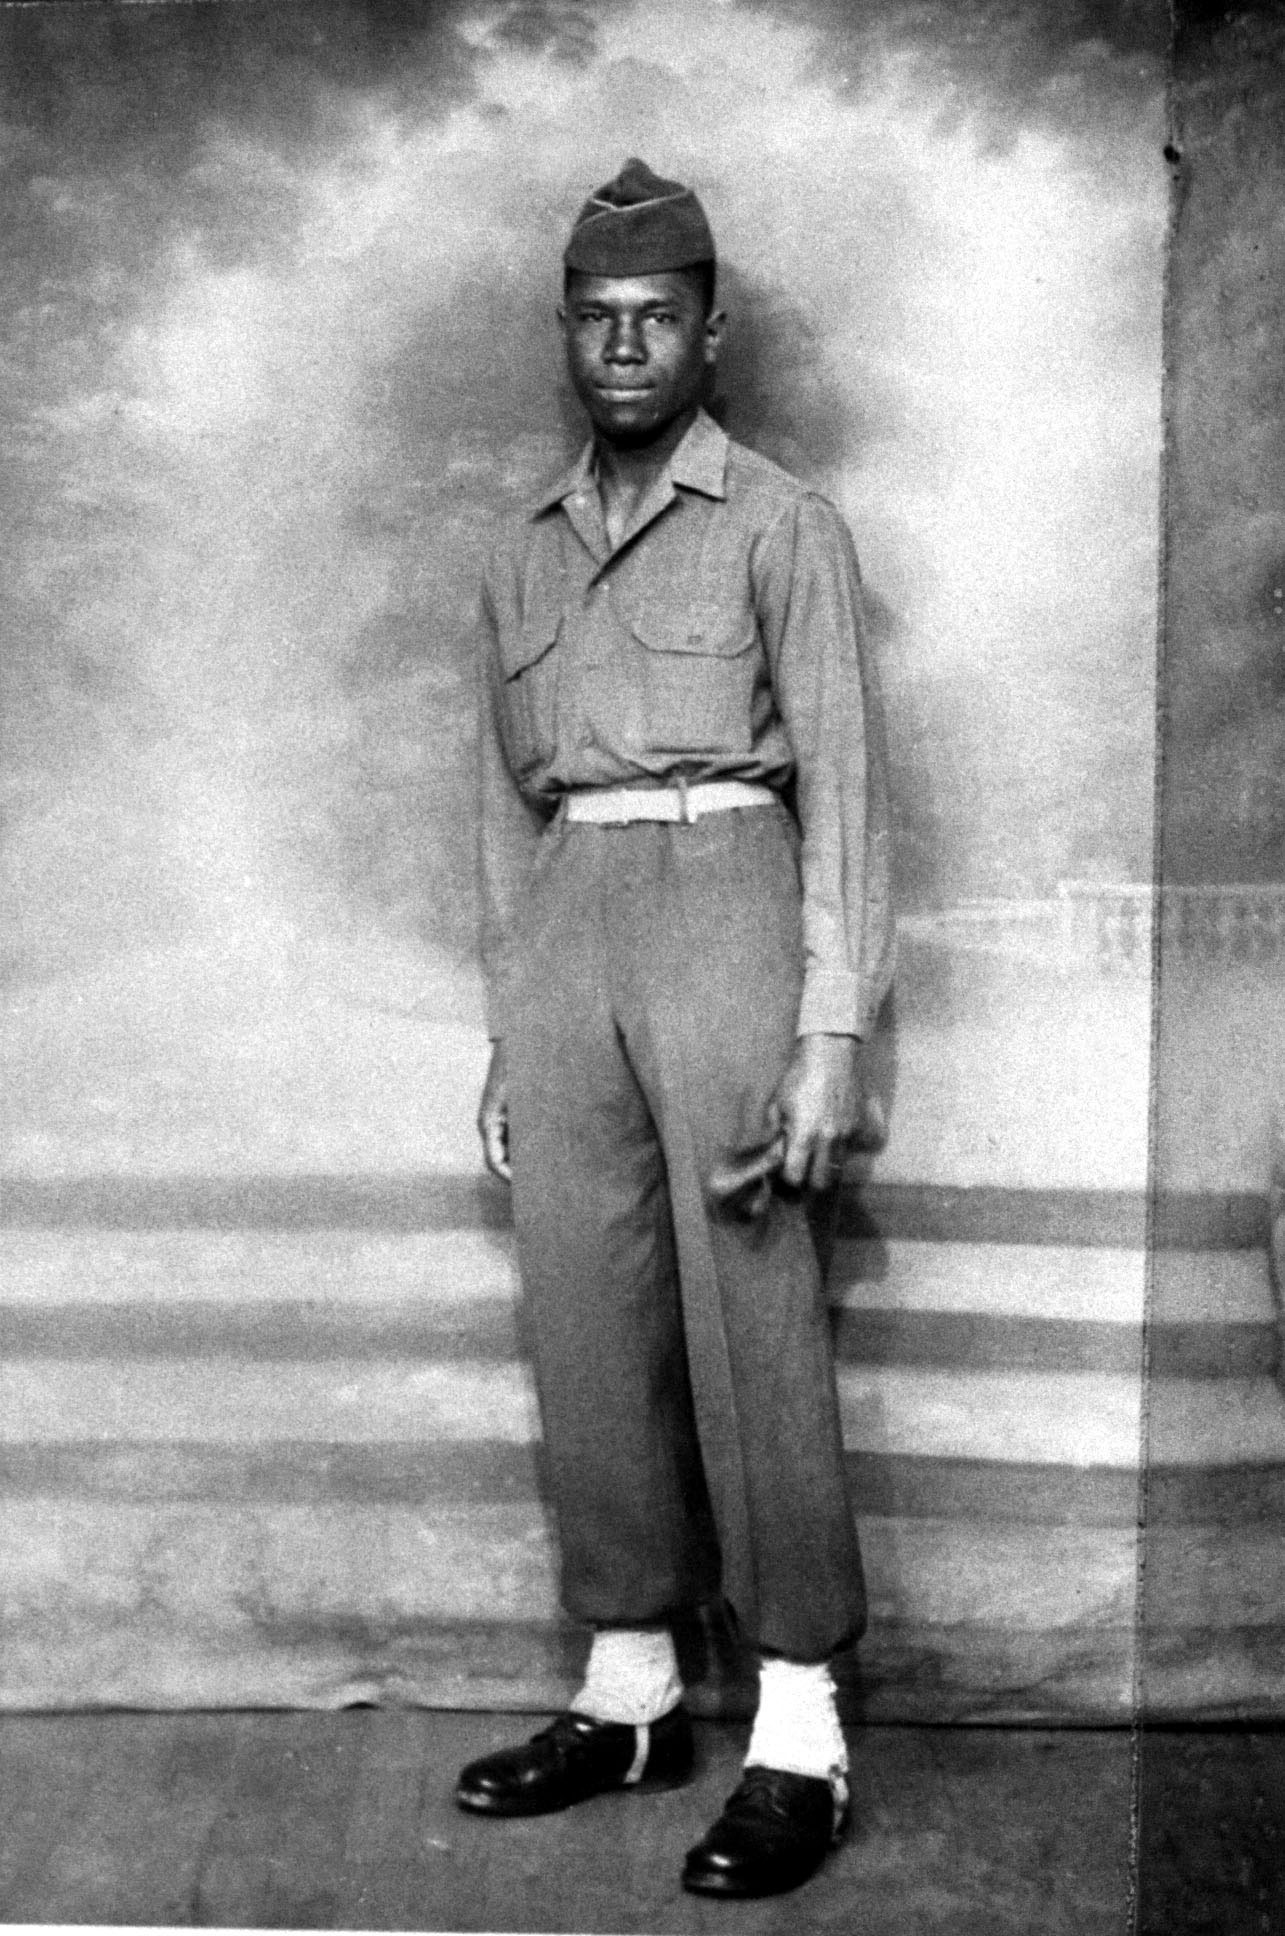 Future civil rights leader Medgar Evers posing in his army uniform in Charbourg, France, in 1945.